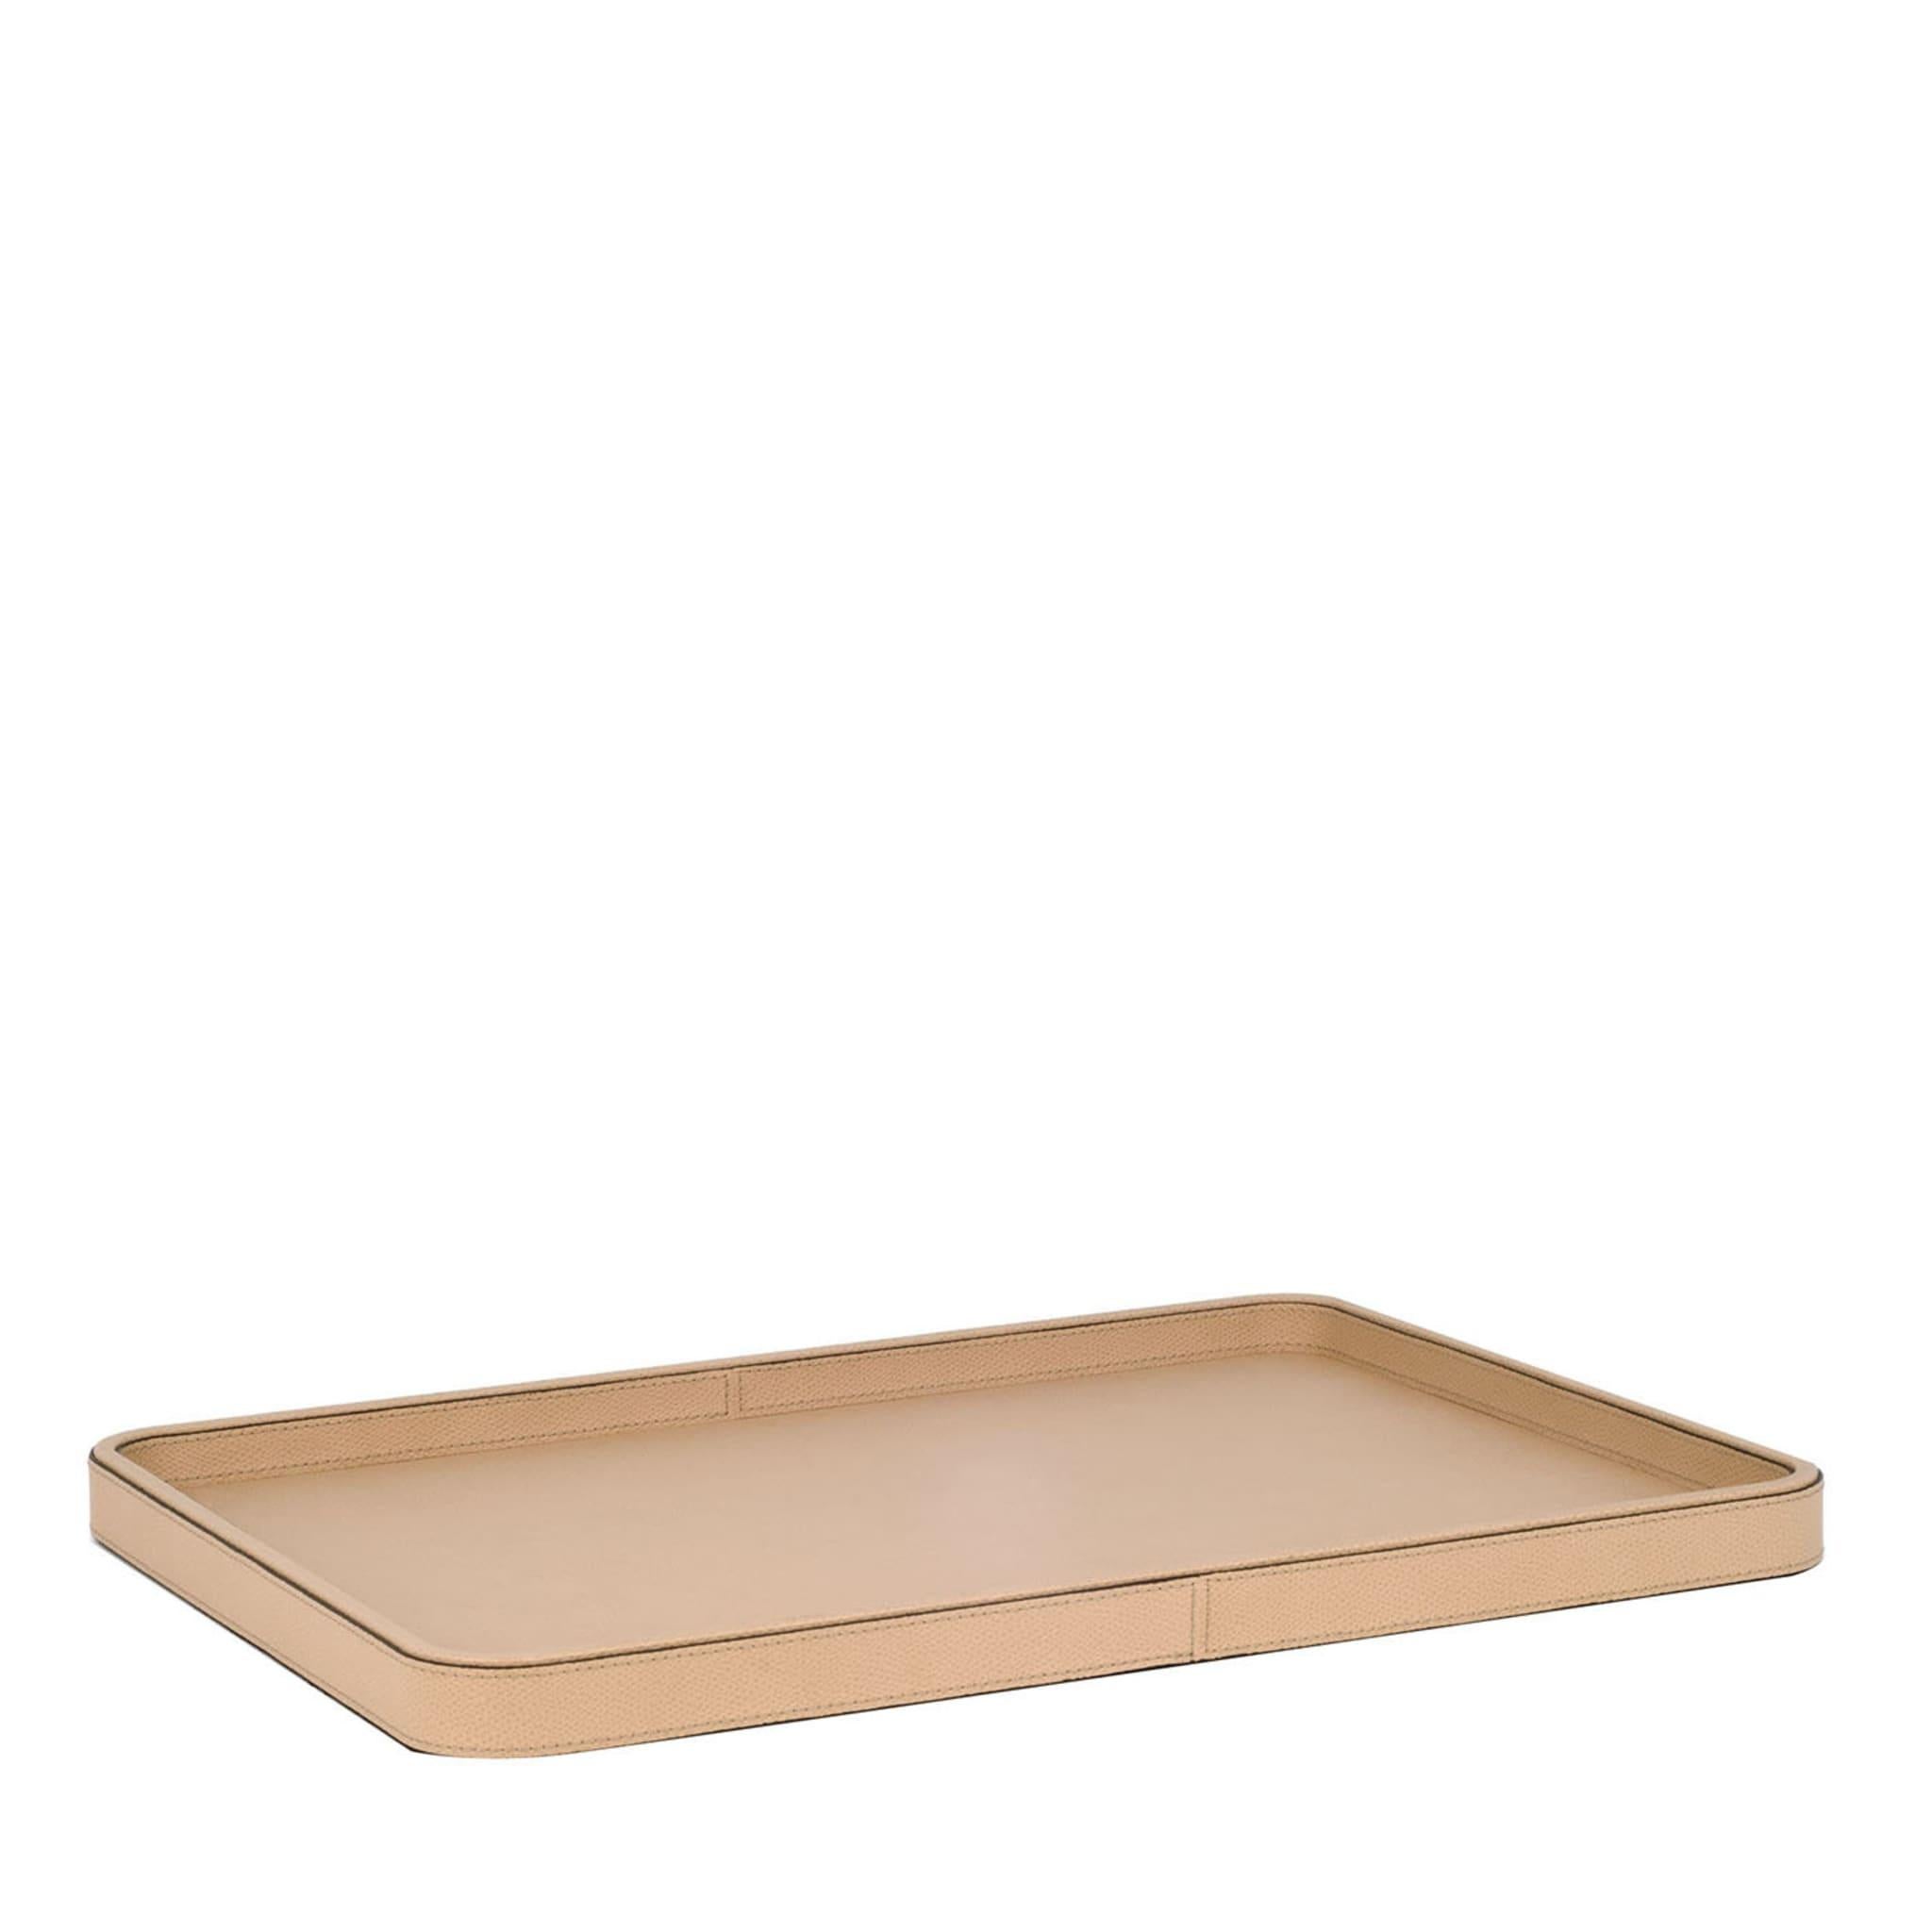 Fully upholstered in prized leather offered in a warm tone of nut-brown, this superb tray with rounded corners will elegantly complement a desk in a private study or a sideboard in a modern living decor. It can be used to serve drinks or to host